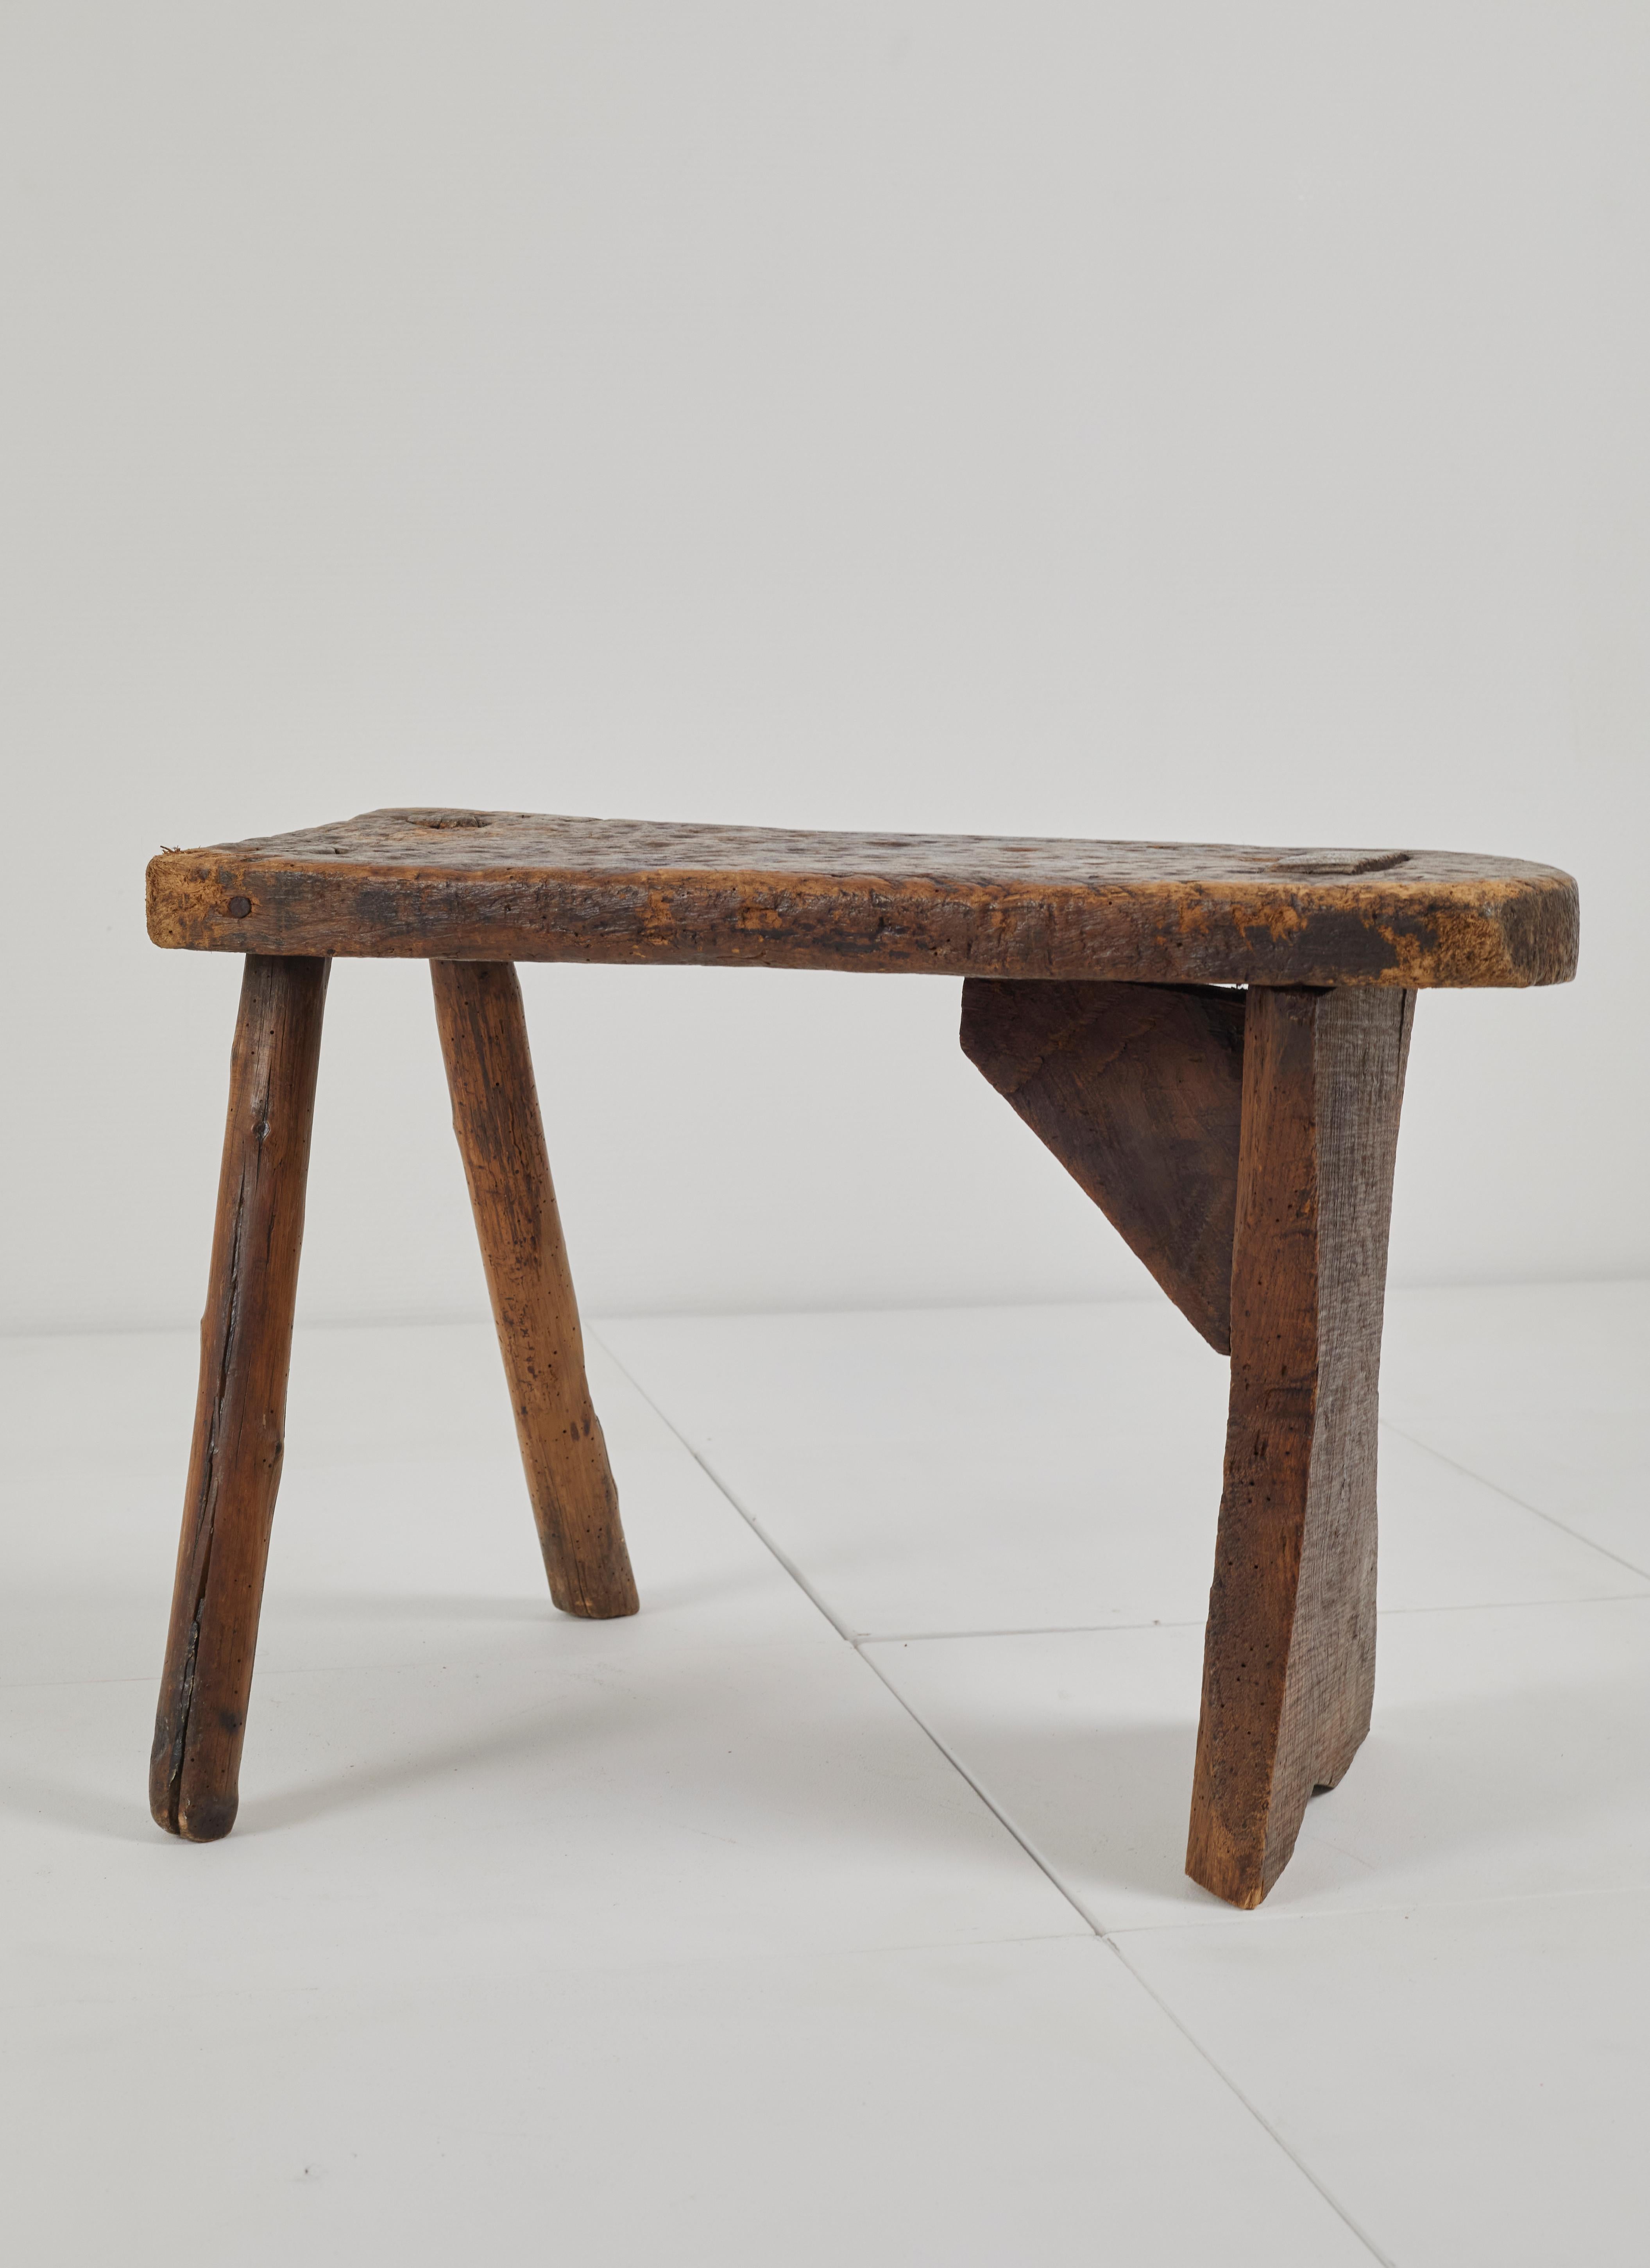 Primitive, Rustic, Antique Bench / Stool, France, 19th Century For Sale 9